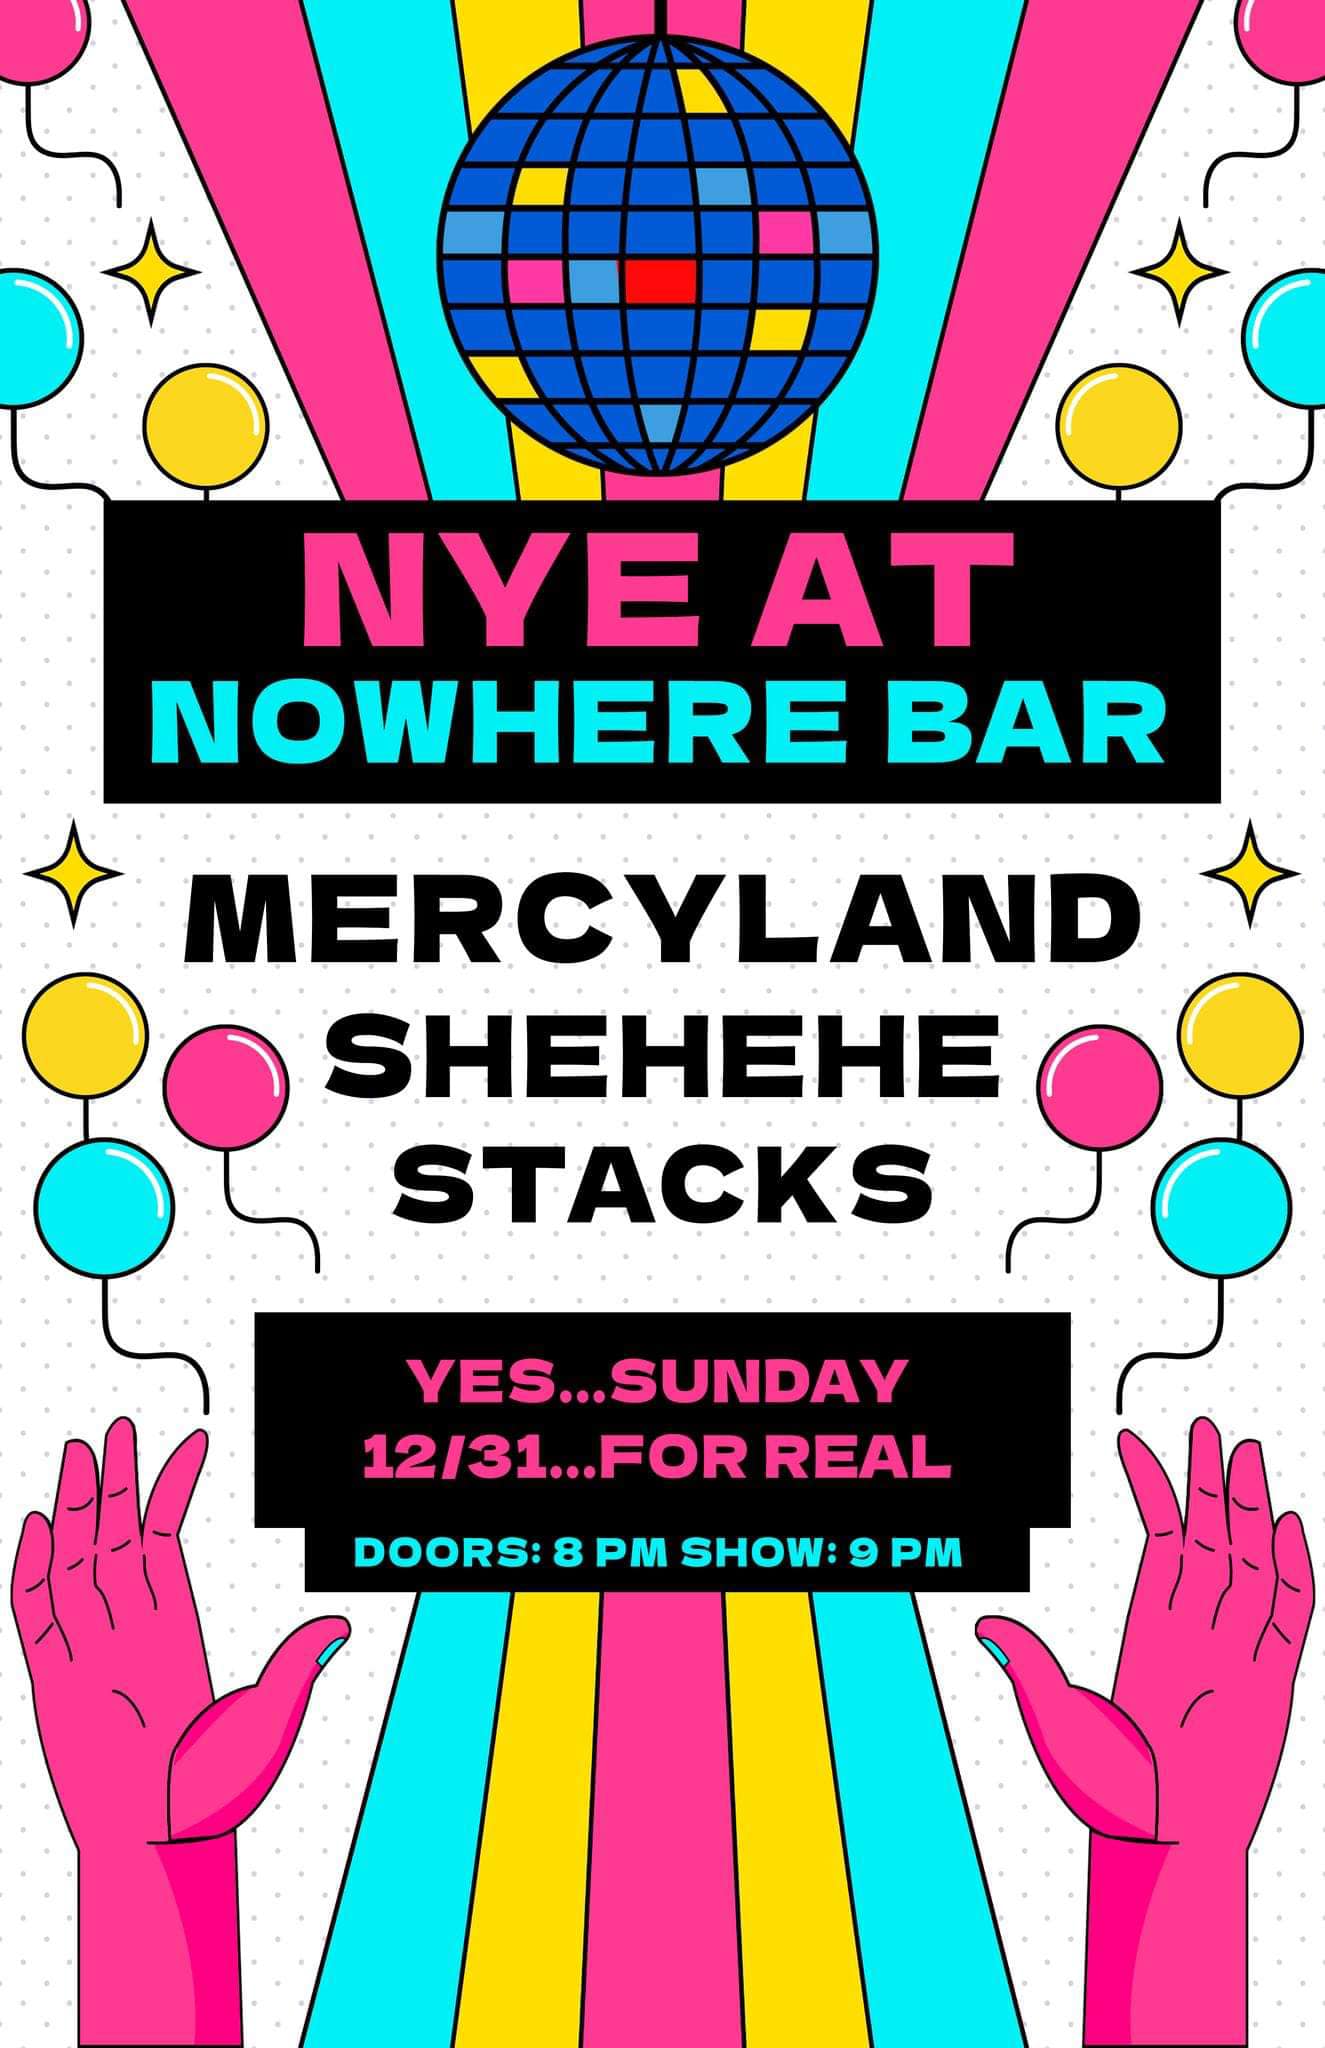 Stacks opening for Mercyland in Athens New Year's Eve!